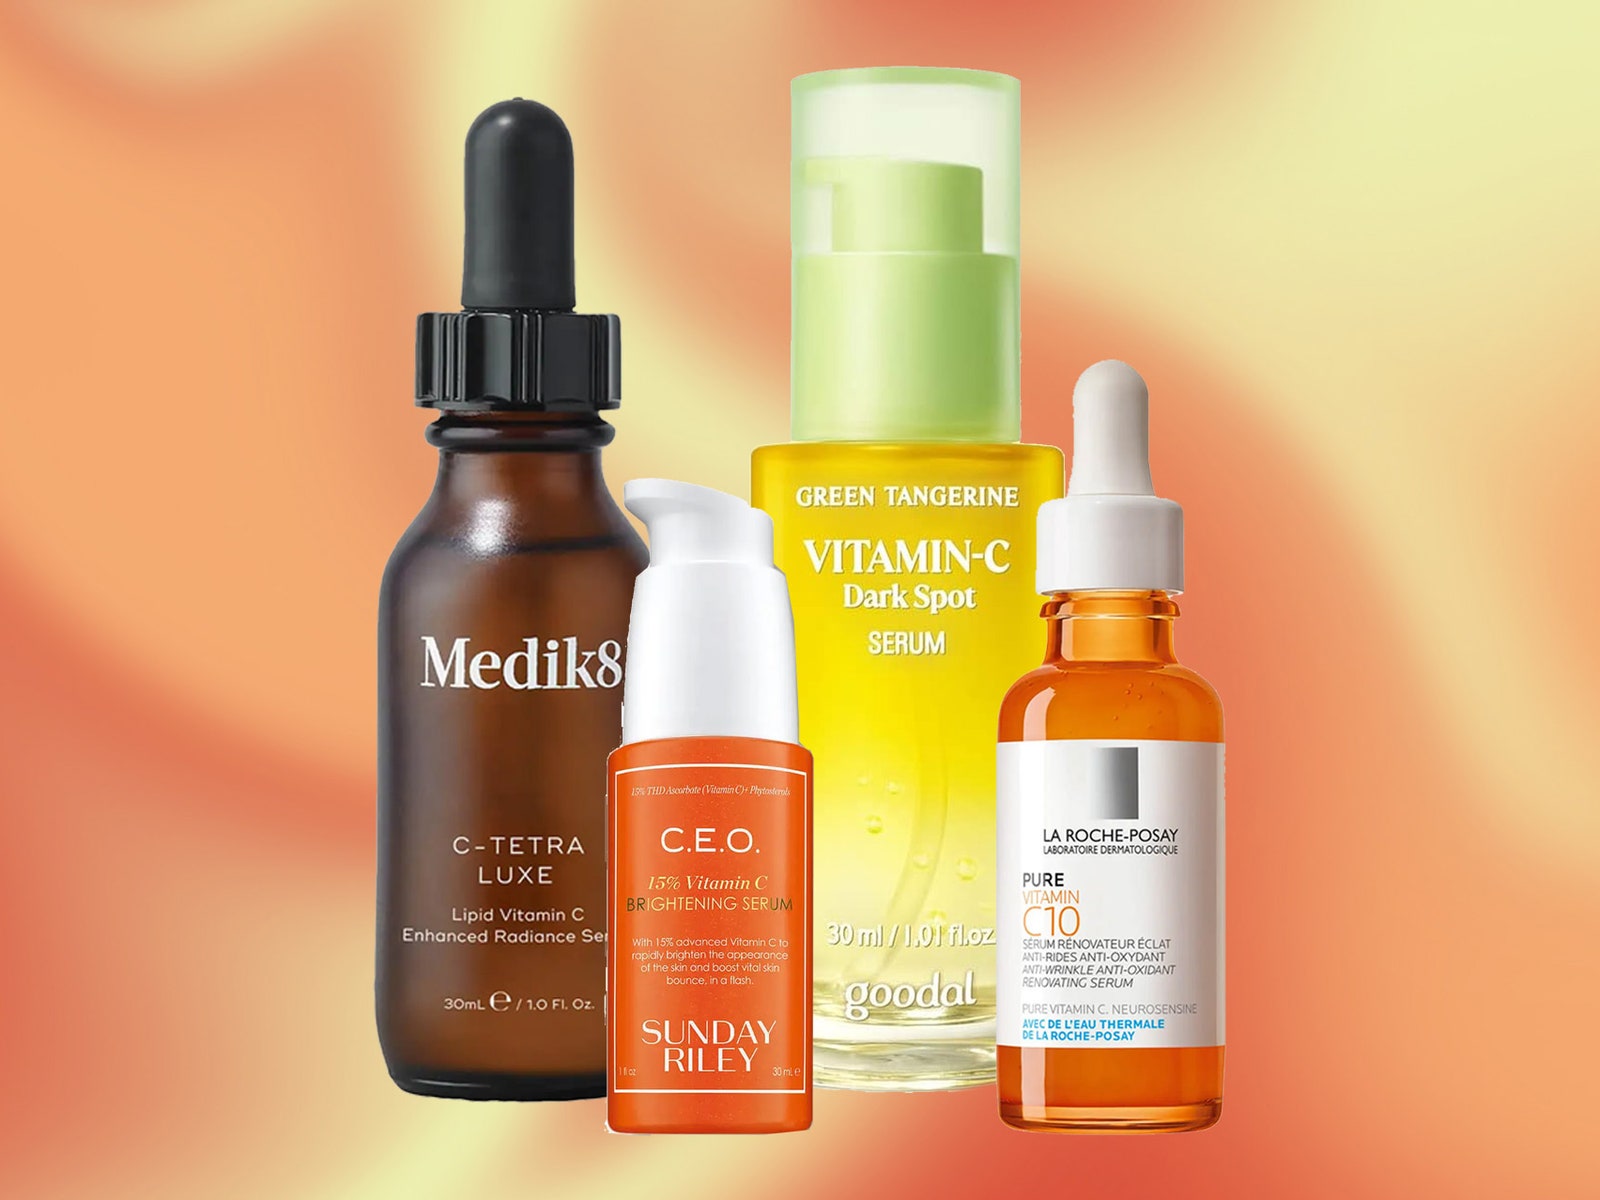 These derm-approved vitamin C serums are a must for any skincare routine